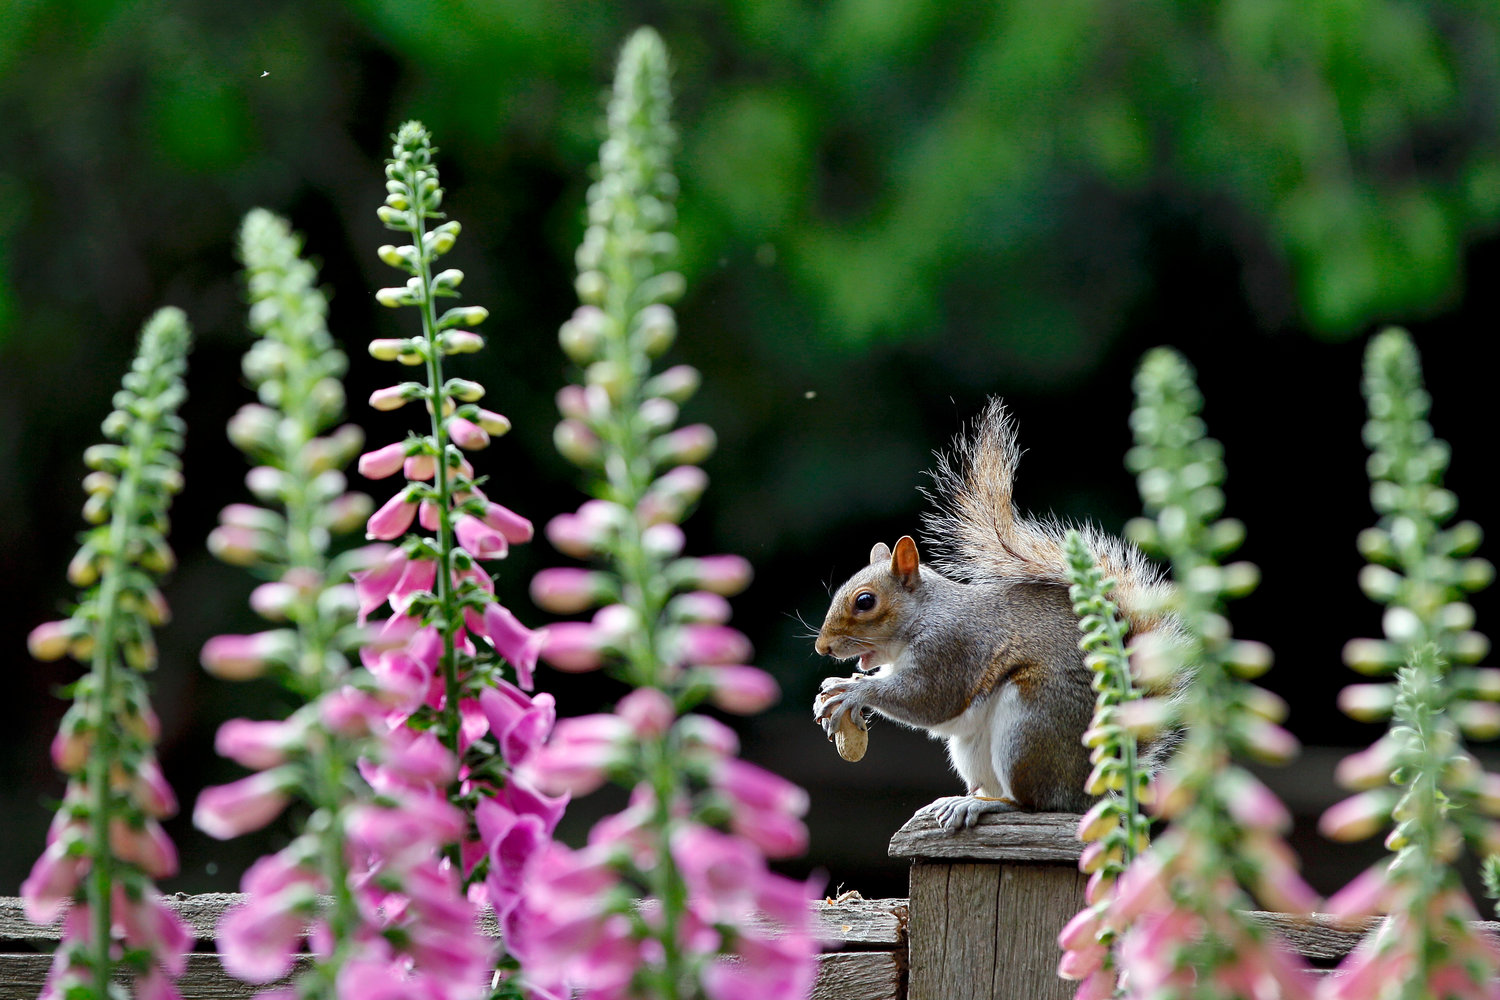 A grey squirrel nibbles a nut in front of foxgloves in St. James Park in London.